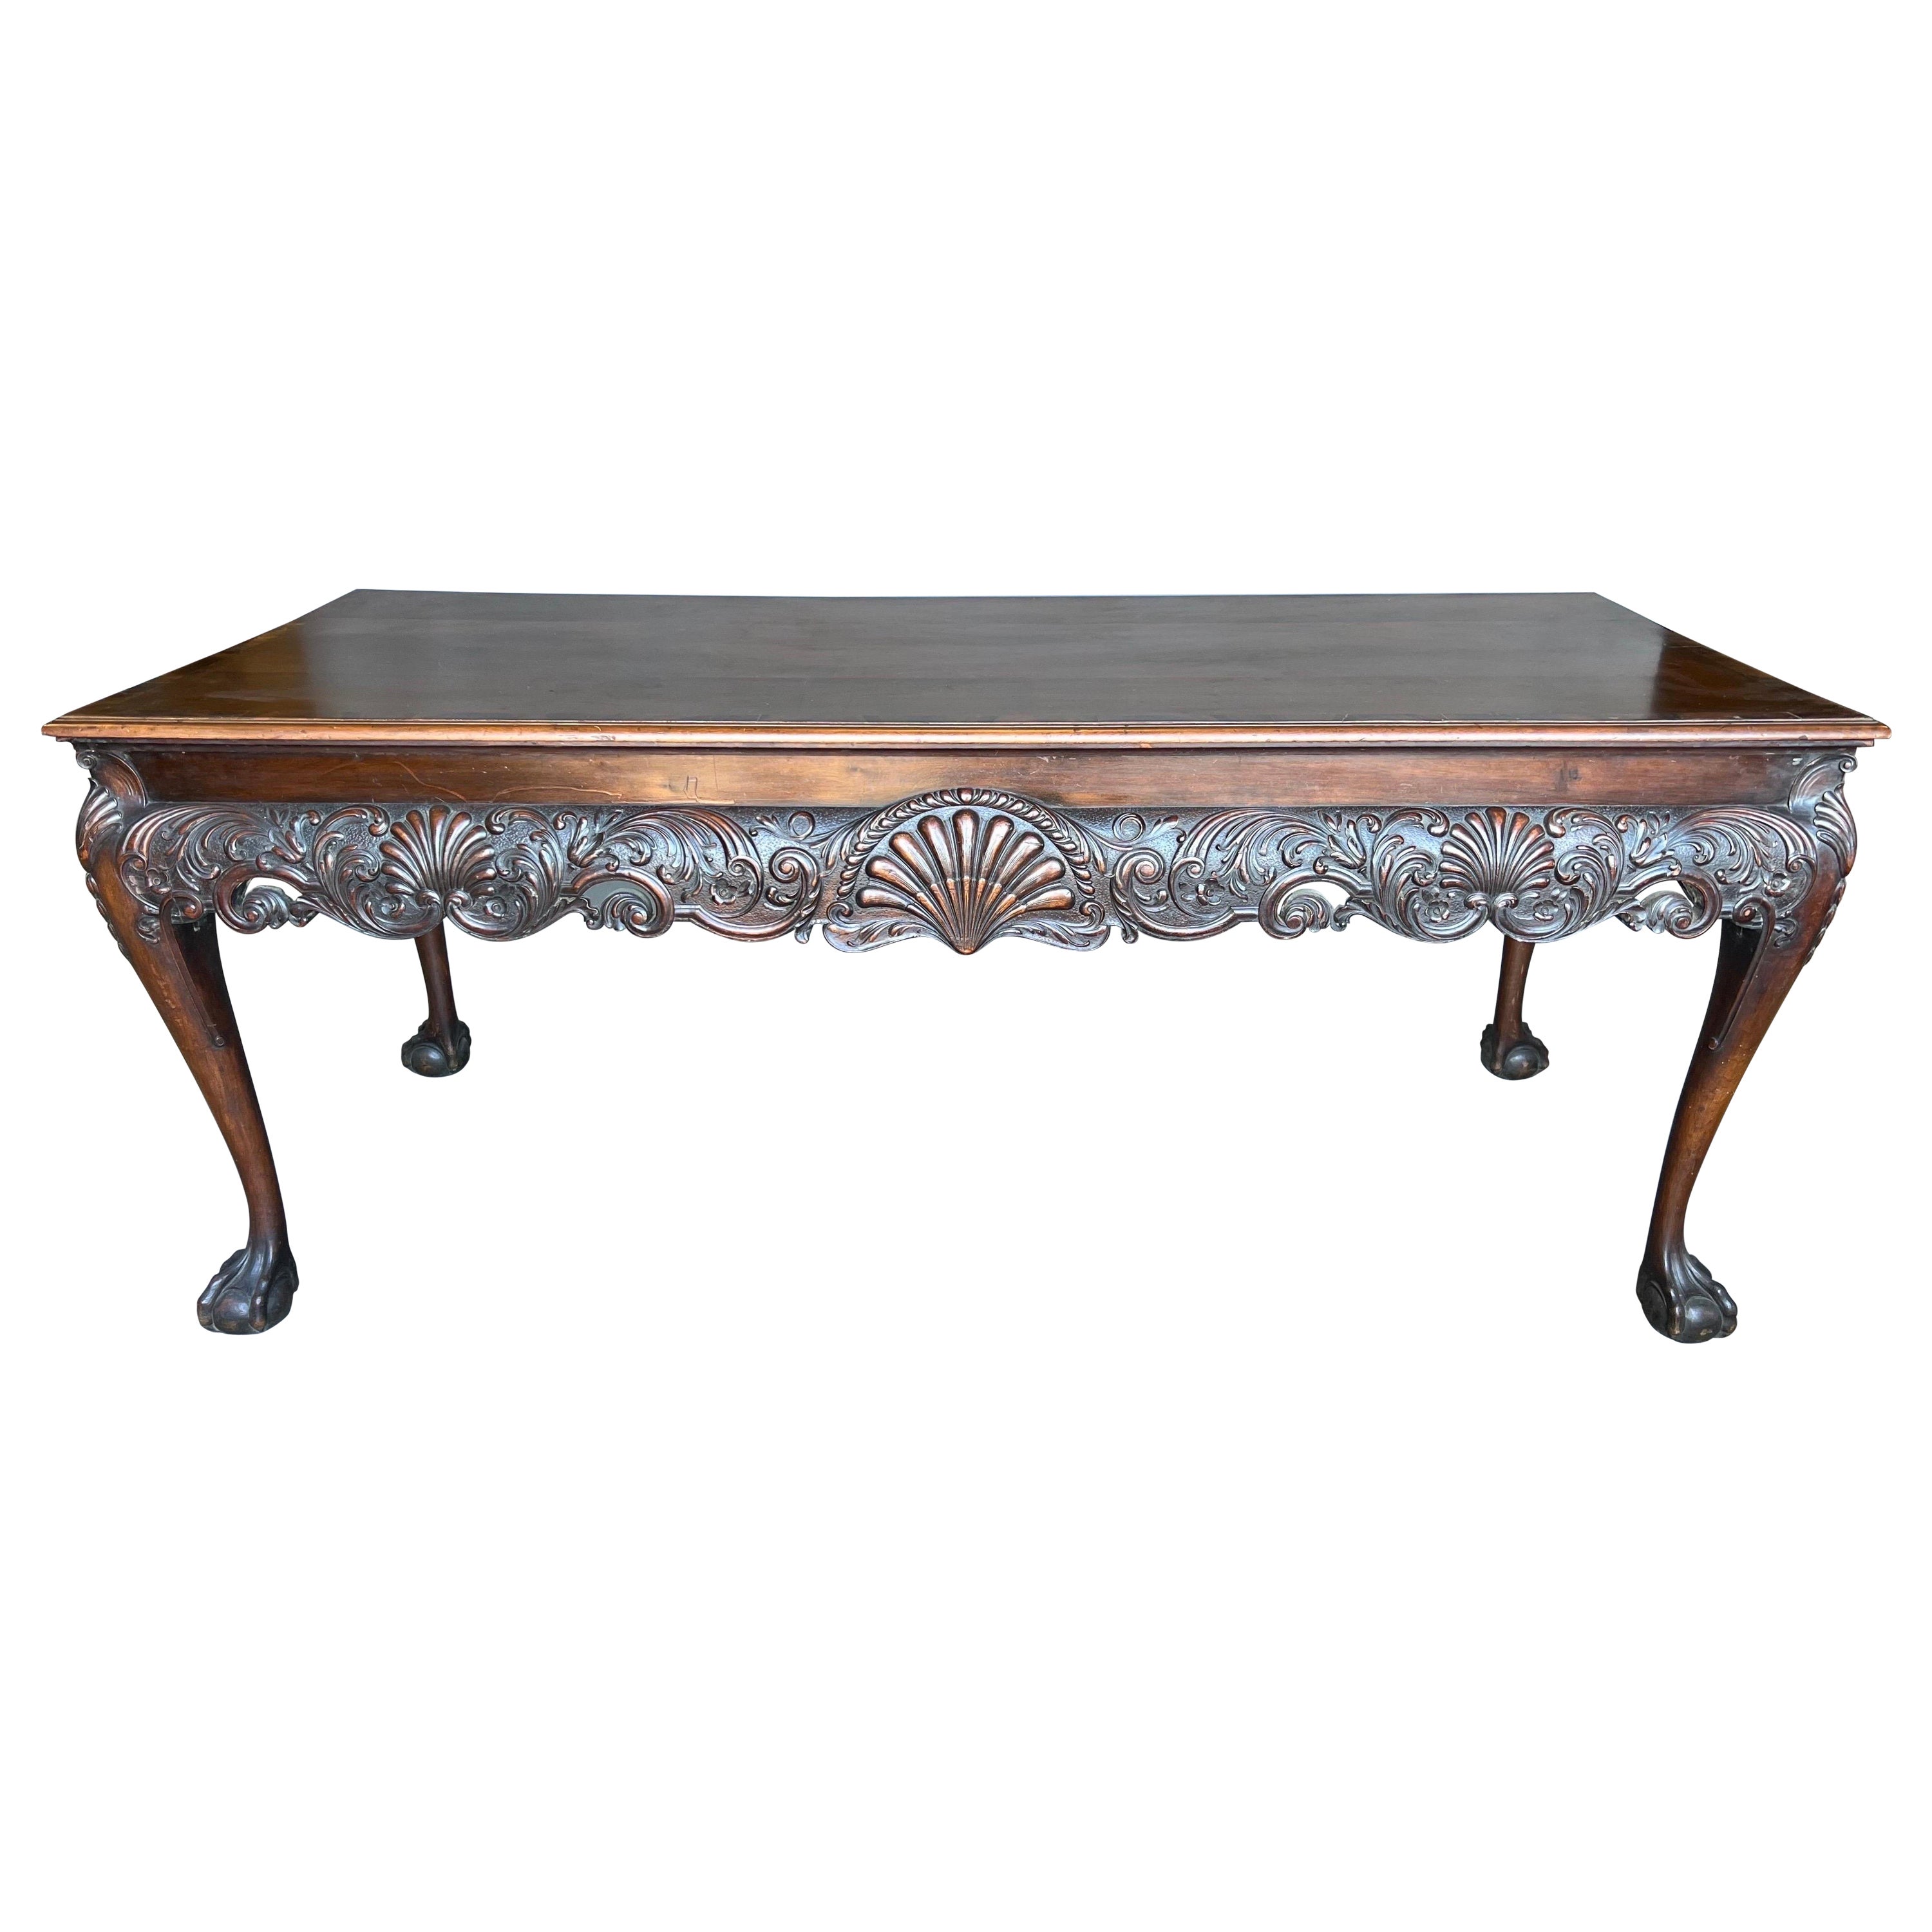 Very Fine 19th Century Mahogany Console Table Stamped Gillows